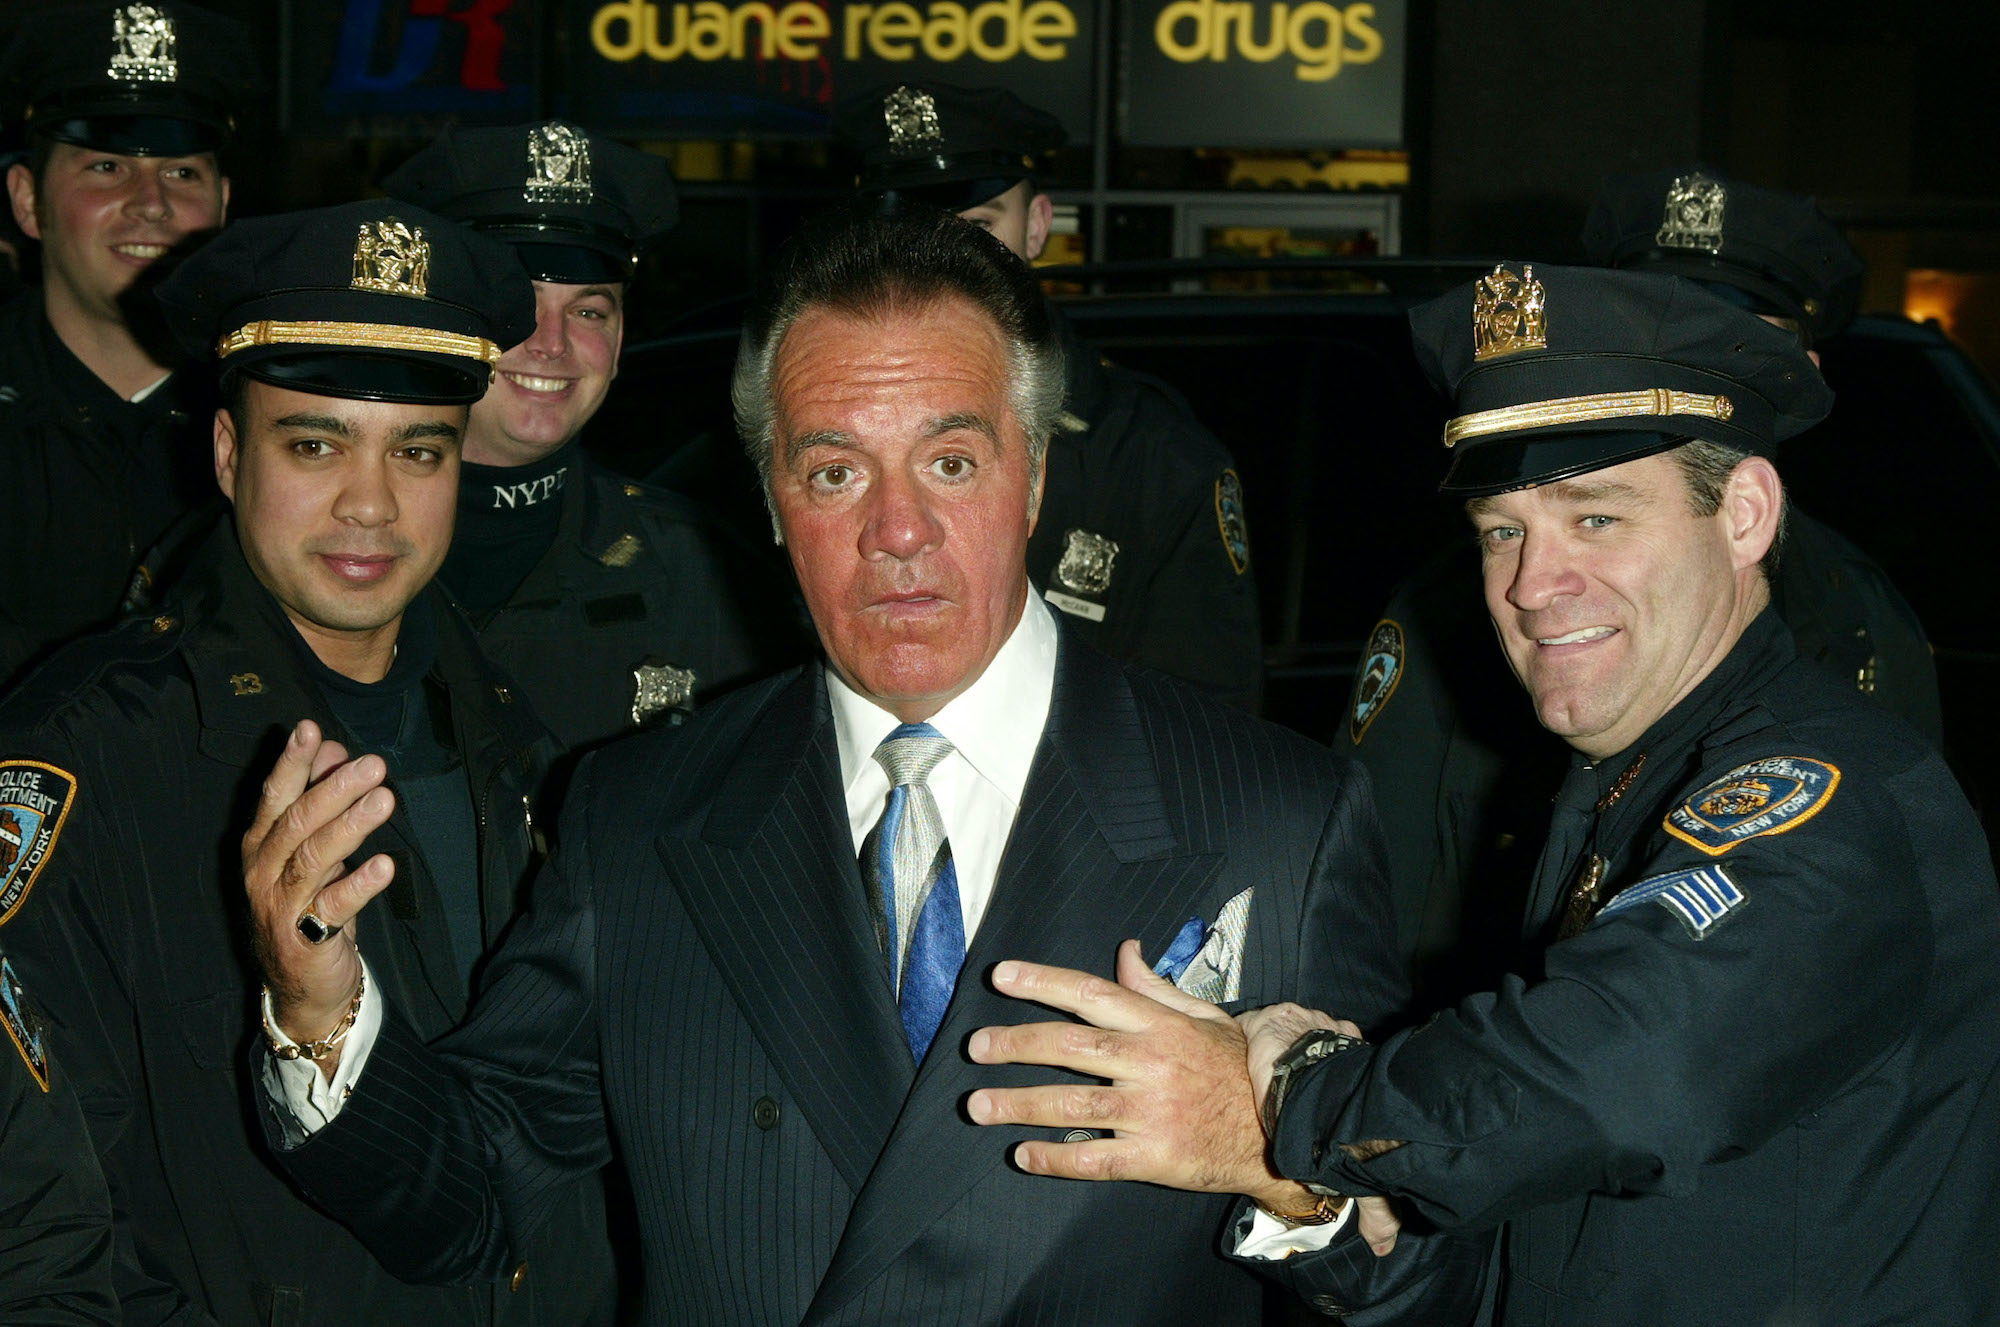 Actor Tony Sirrico posing with NYPD officers